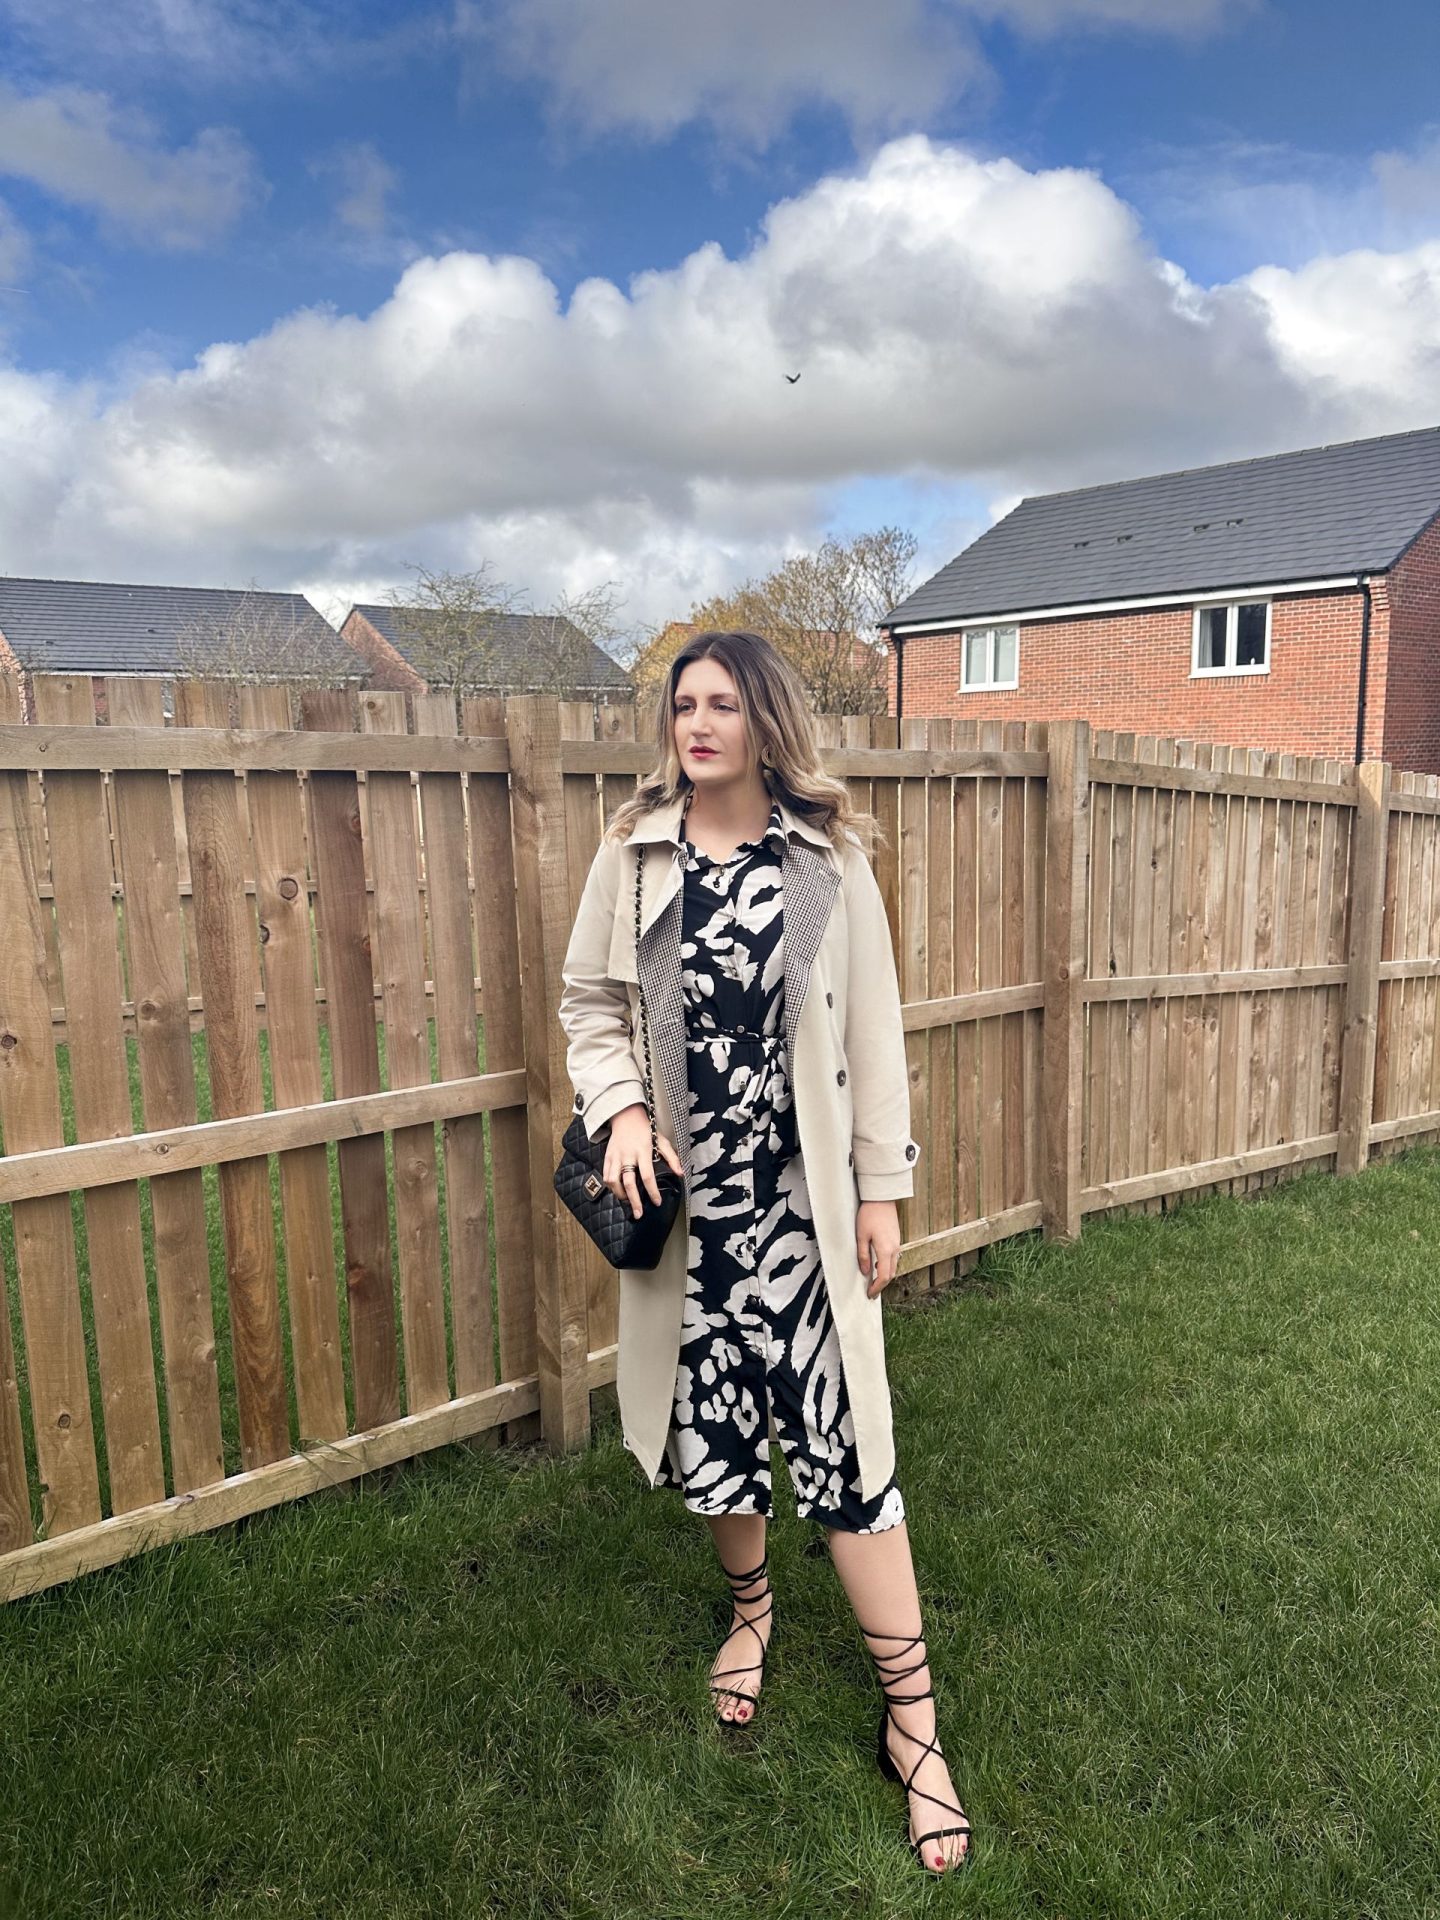 How to Style a Trench Coat for Dressy Occasions